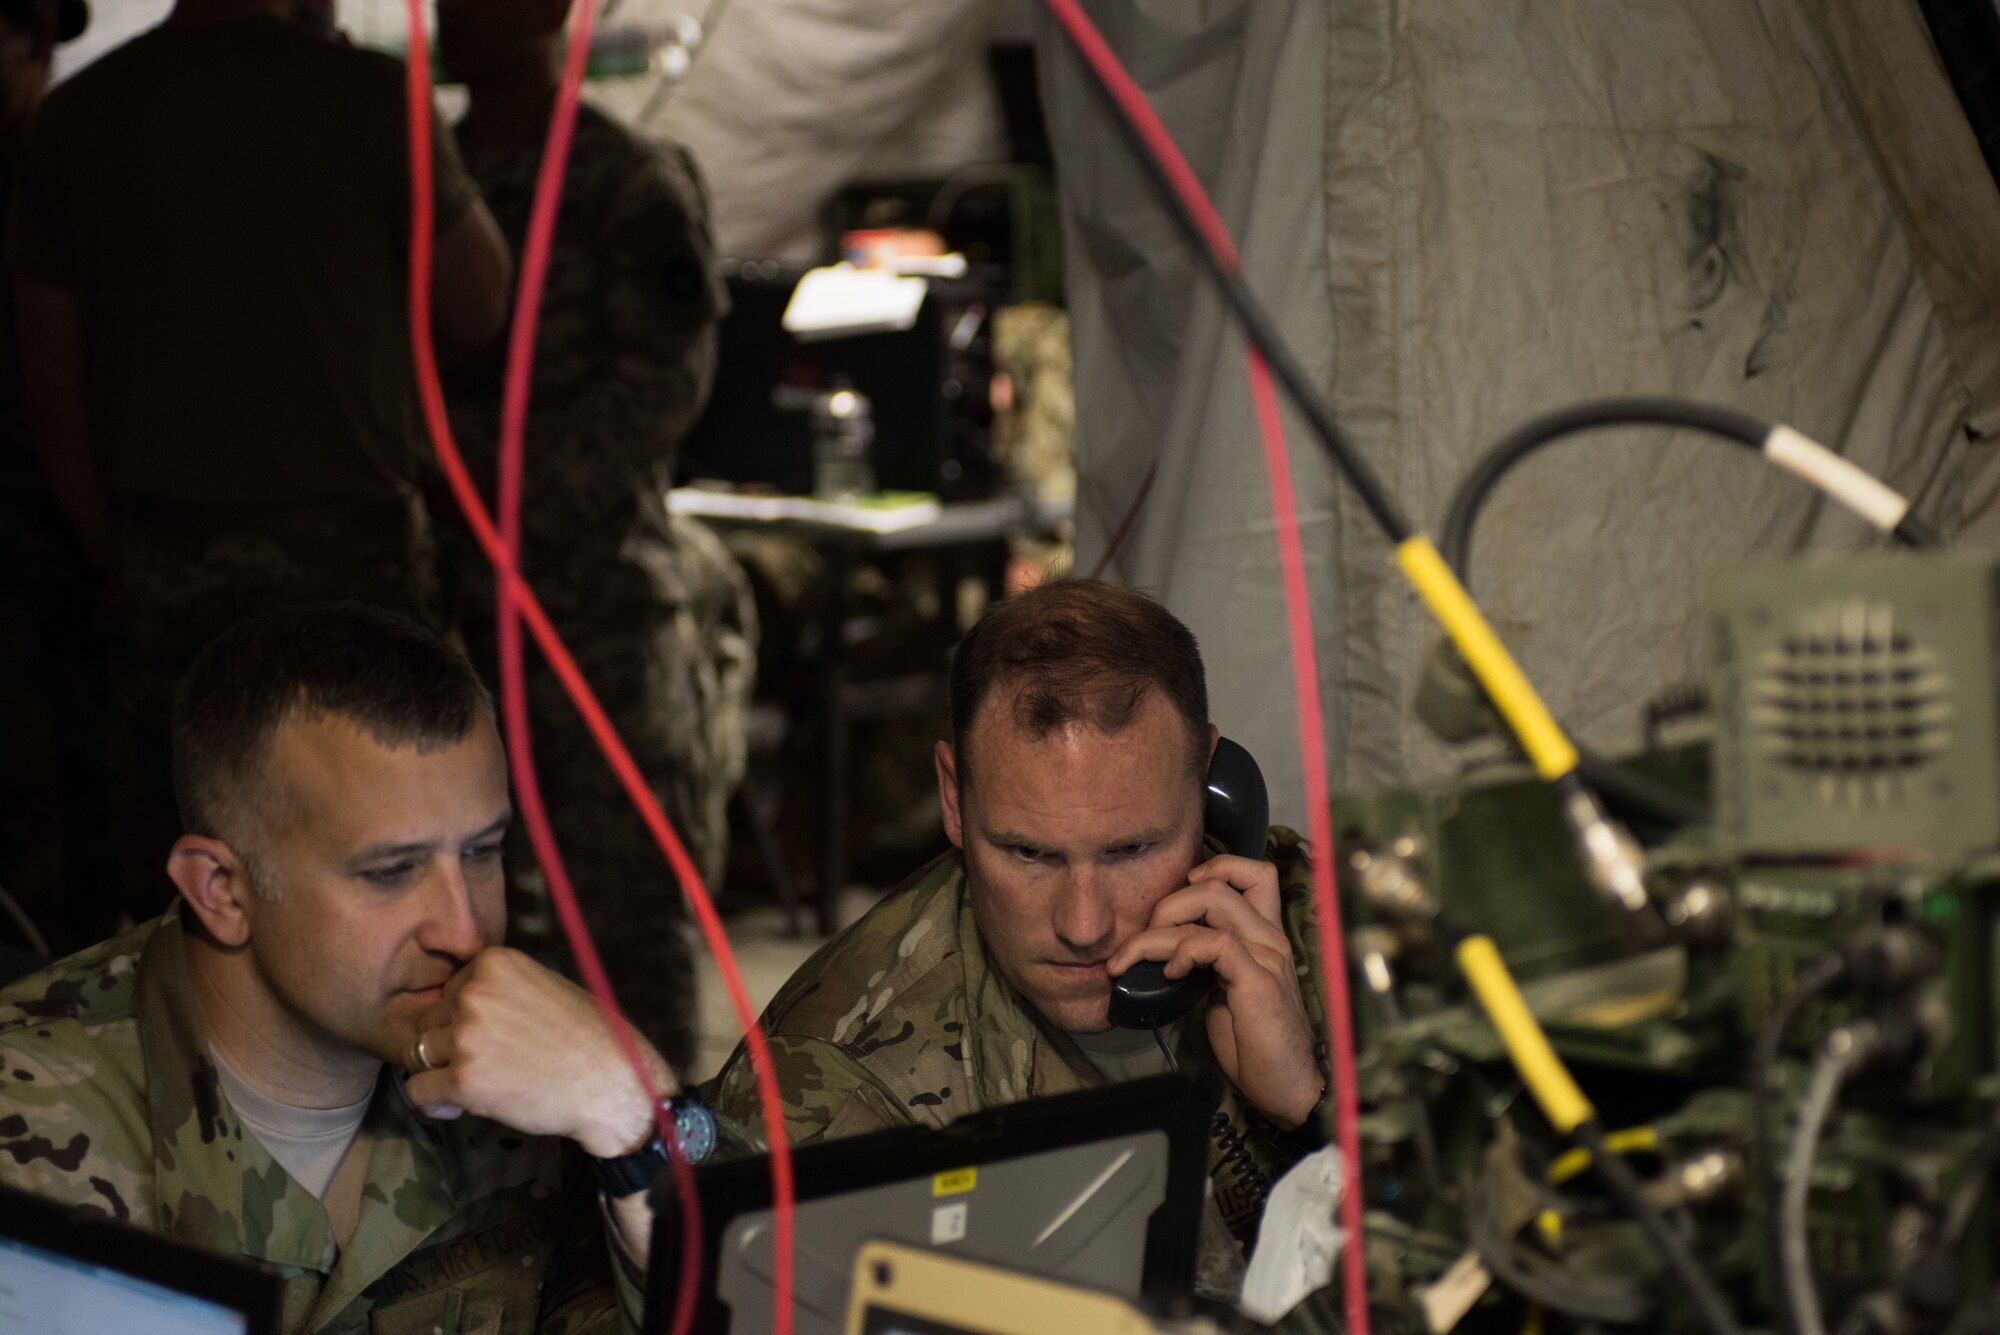 Master Sgt. Benjamin Lake, 146th Air Support Operations Squadron (146th ASOS) chief of weapons and tactics, coordinates a simulated air strike during a combat scenario with Lt. Col. Craig Ilschner, commander of the 146th ASOS, during Warfighter 18-5 (WFX-18-5) June 10, 2018, at Camp Atterbury Joint Maneuver Training Center near Edinburgh, Indiana. WFX-18-5 was conducted to help components of the 34th Infantry Division become accustomed to using Army battle drills in a computer-simulated combat environment. (U.S. Air National Guard photo by Staff Sgt. Brigette Waltermire)